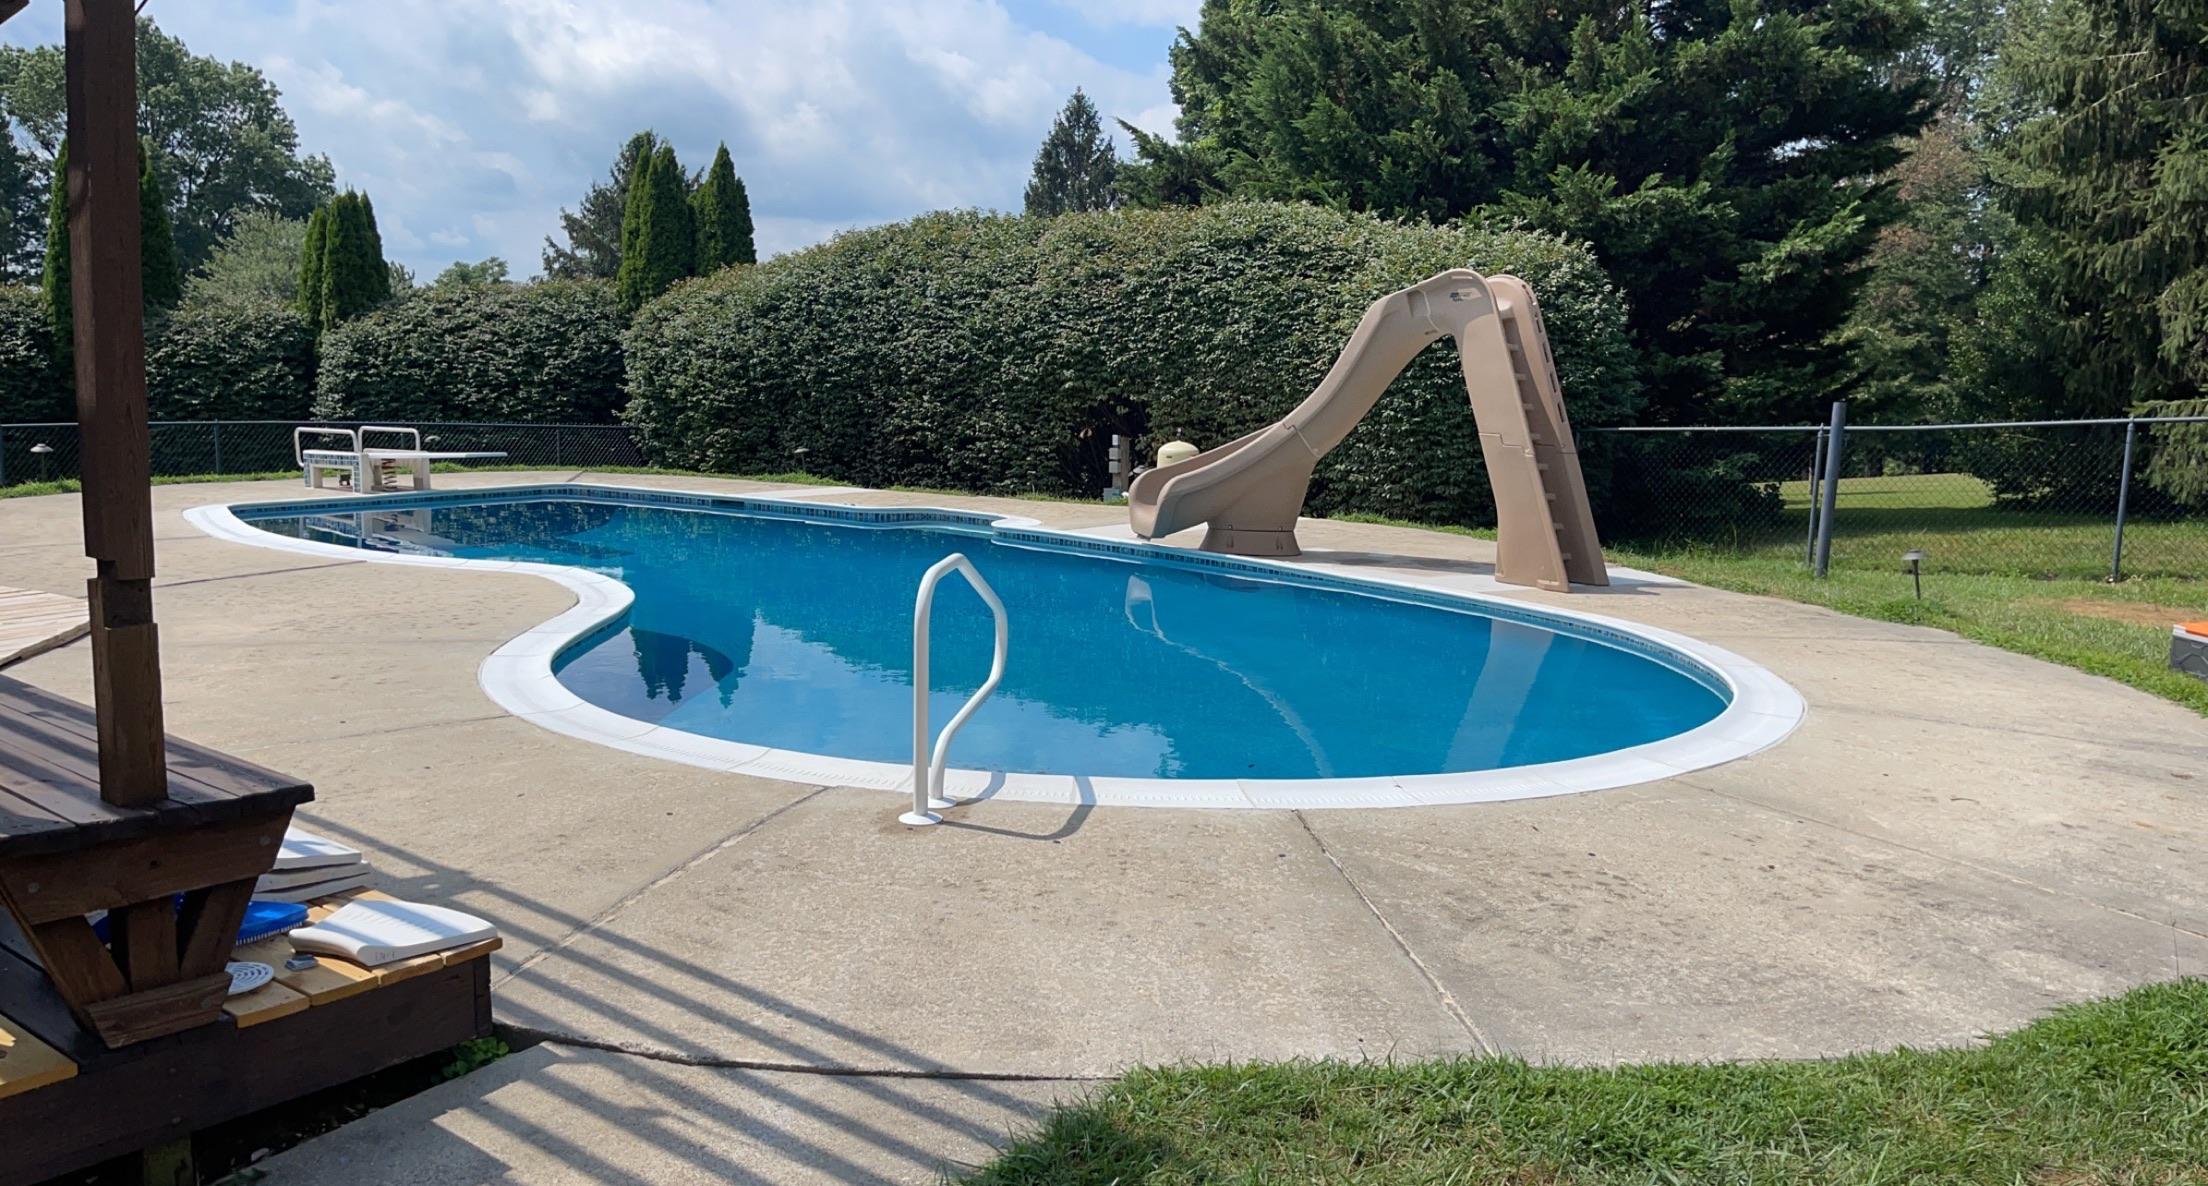 Resurfaced pool with a slide